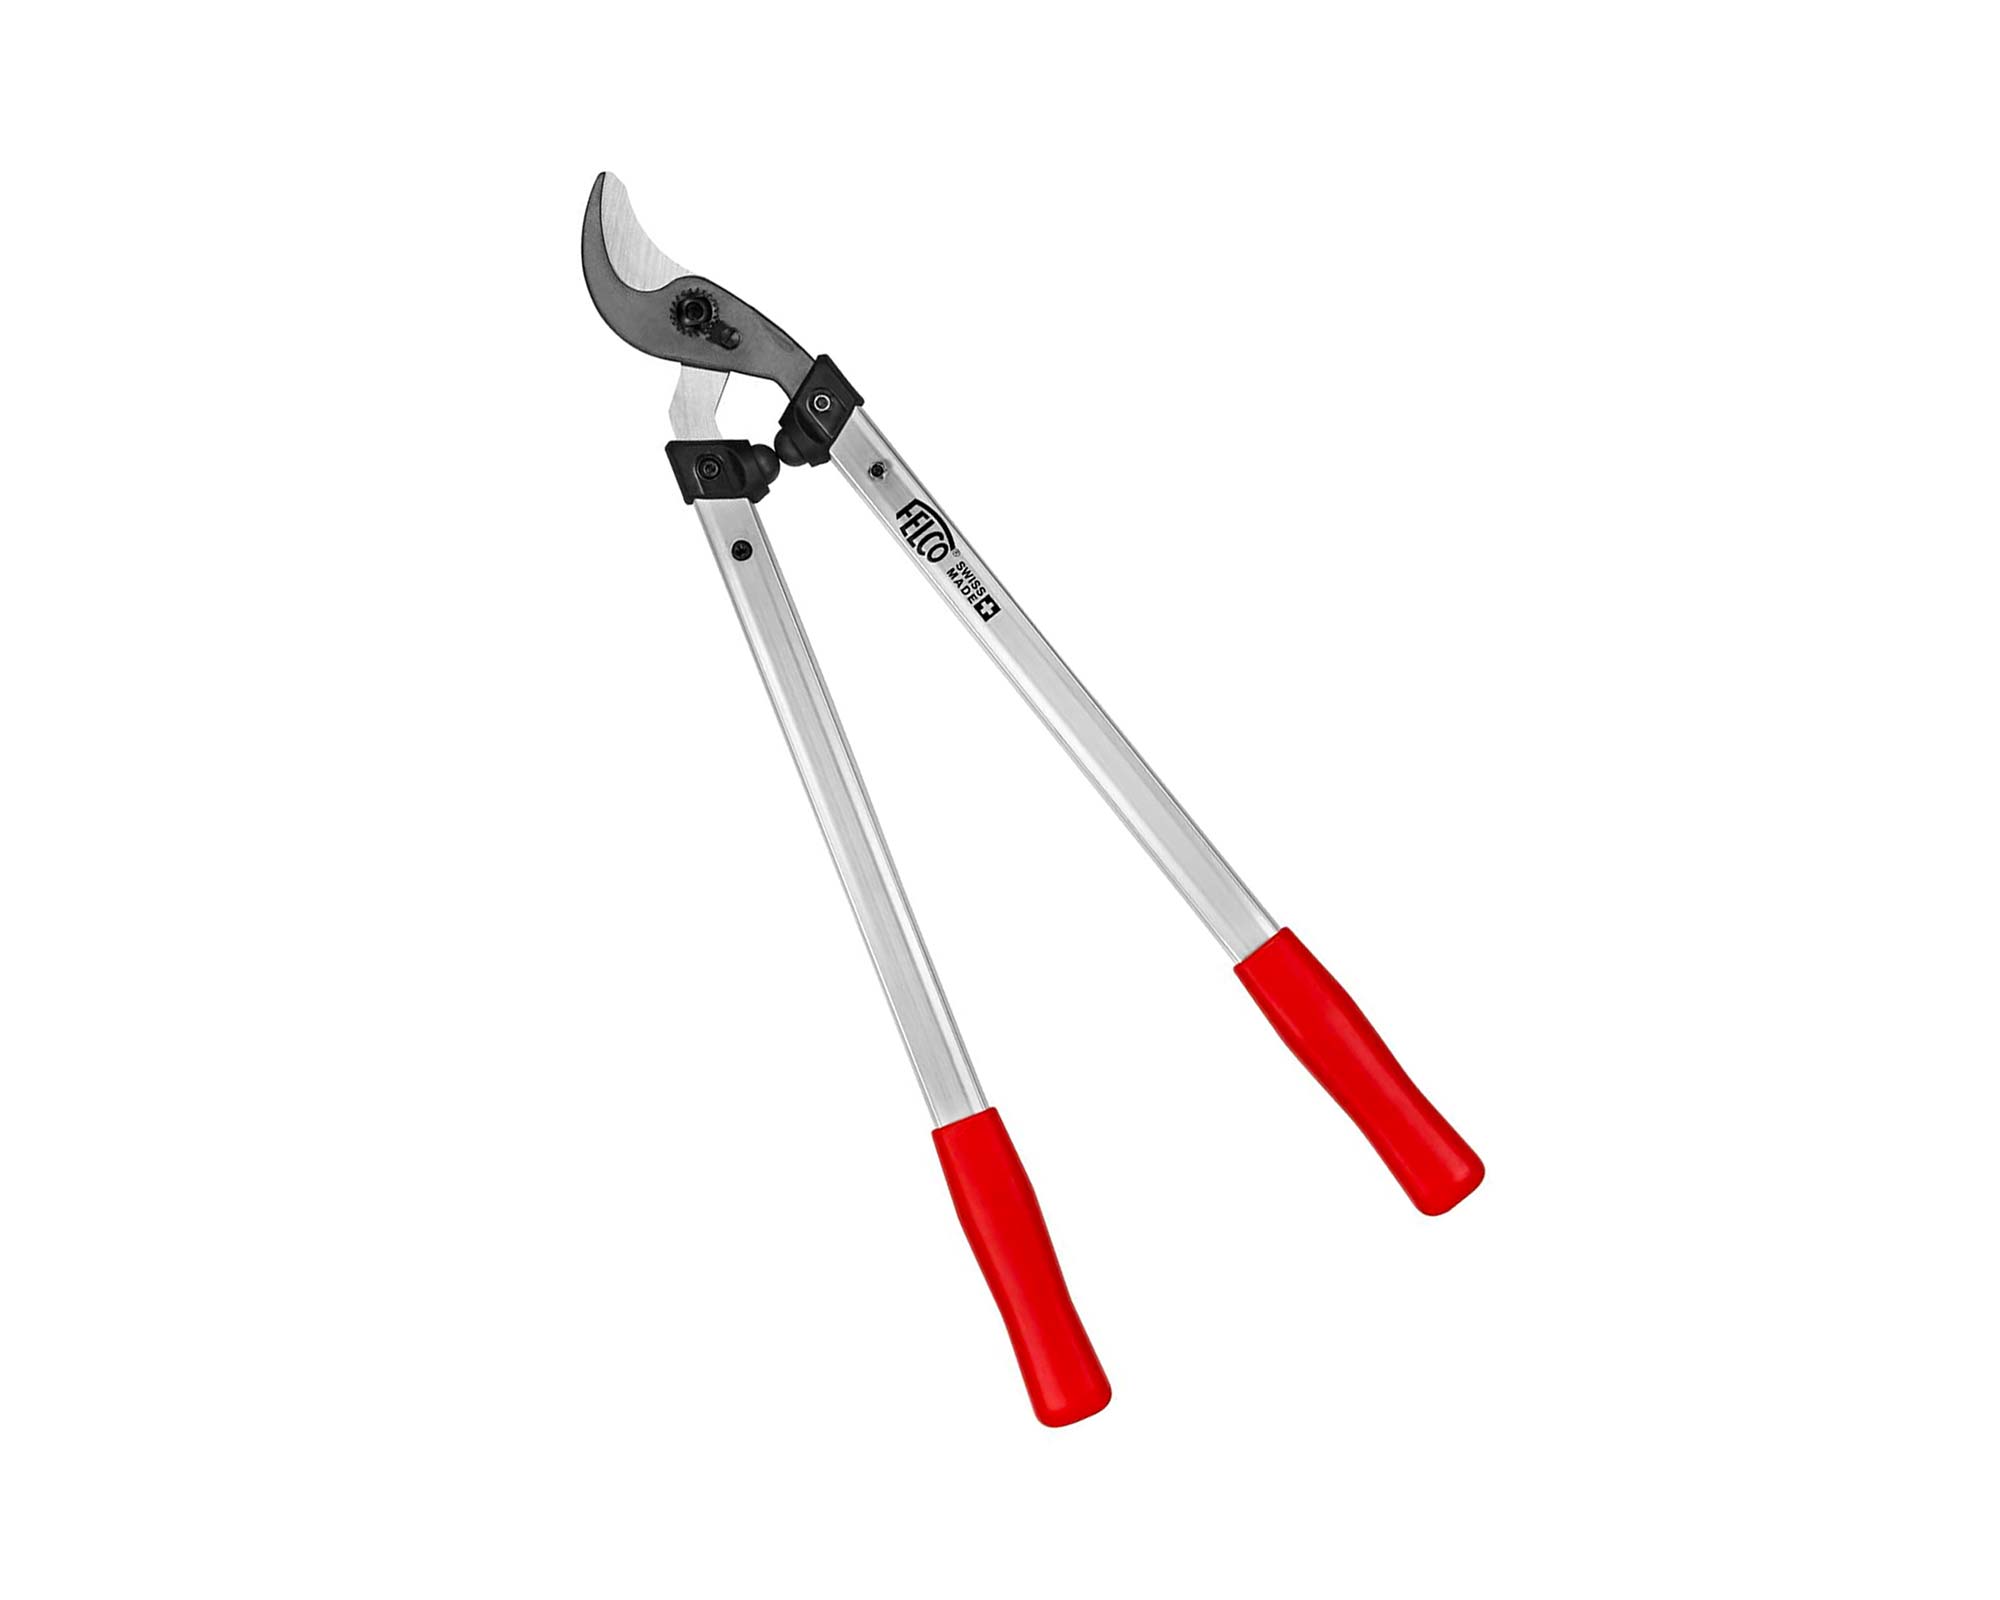 Felco 211-60 loppers